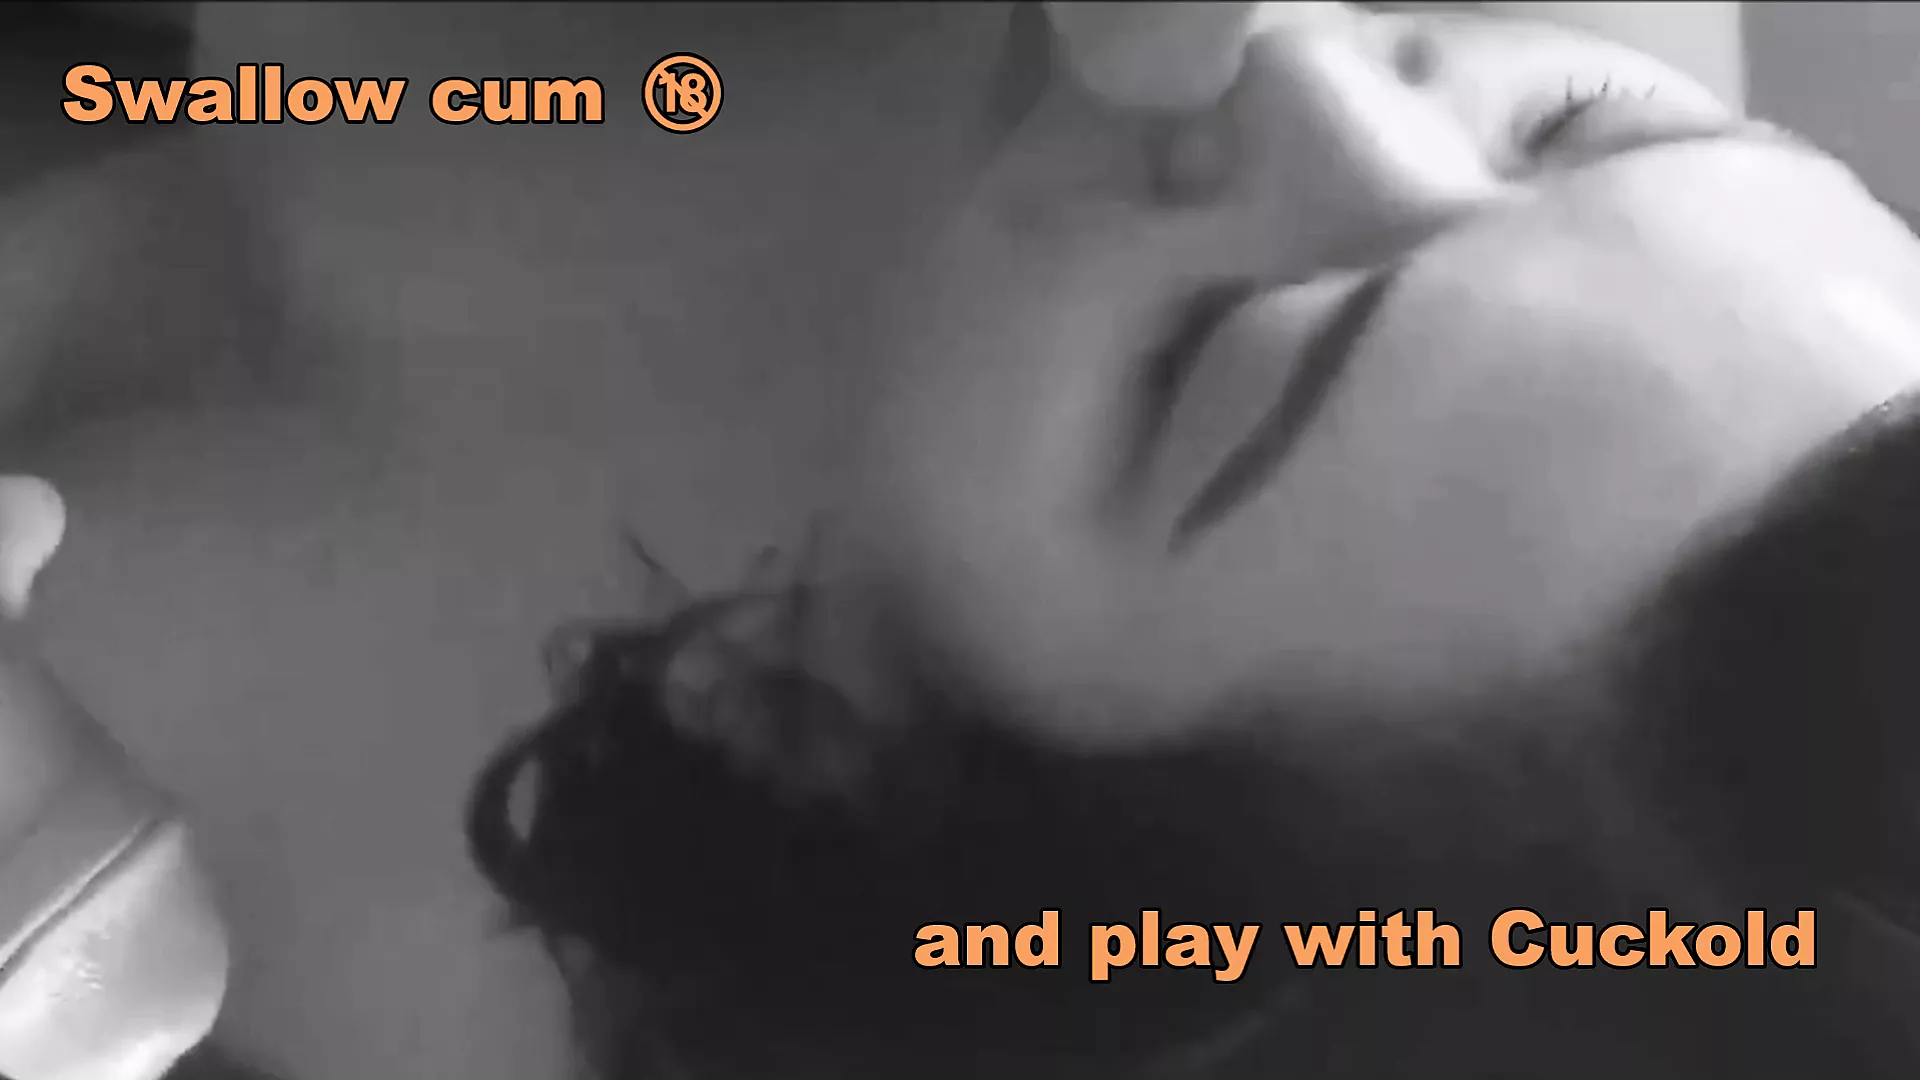 Swallowing cum in front of my cuckold pic